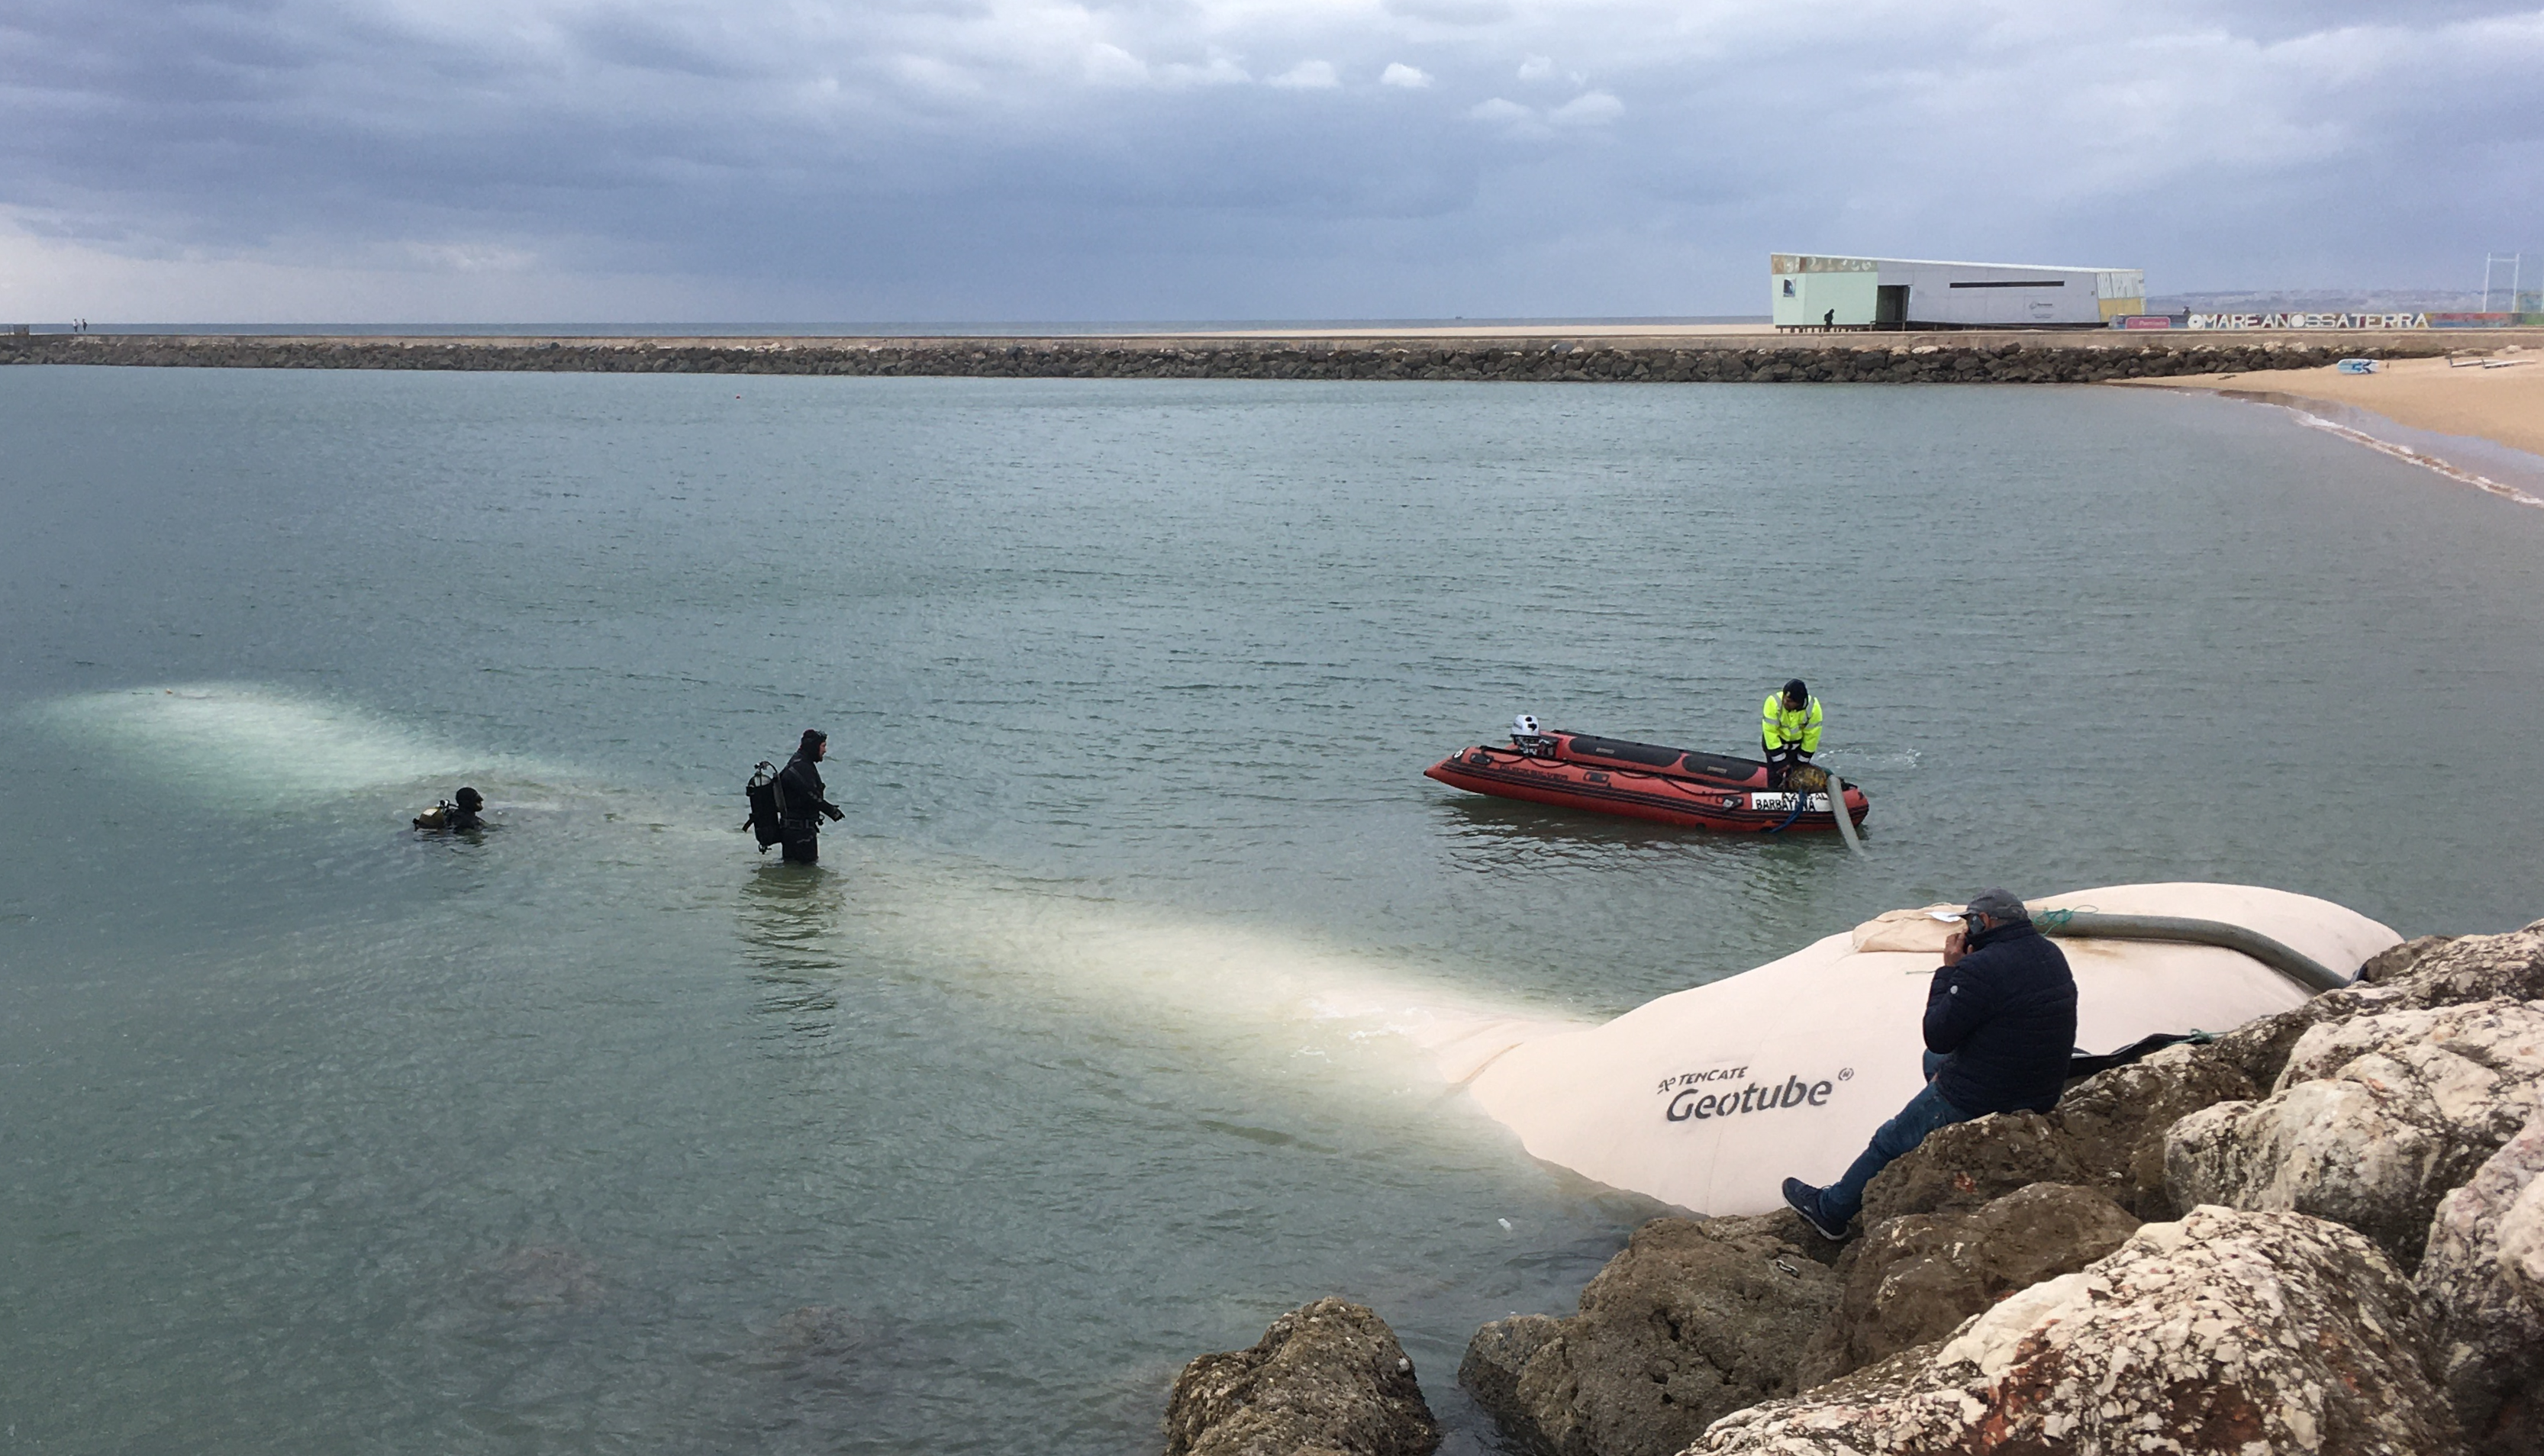 Installation of Solmax GEOTUBE systems at Marina of Portimão, with divers and marine equipment actively working in the water.